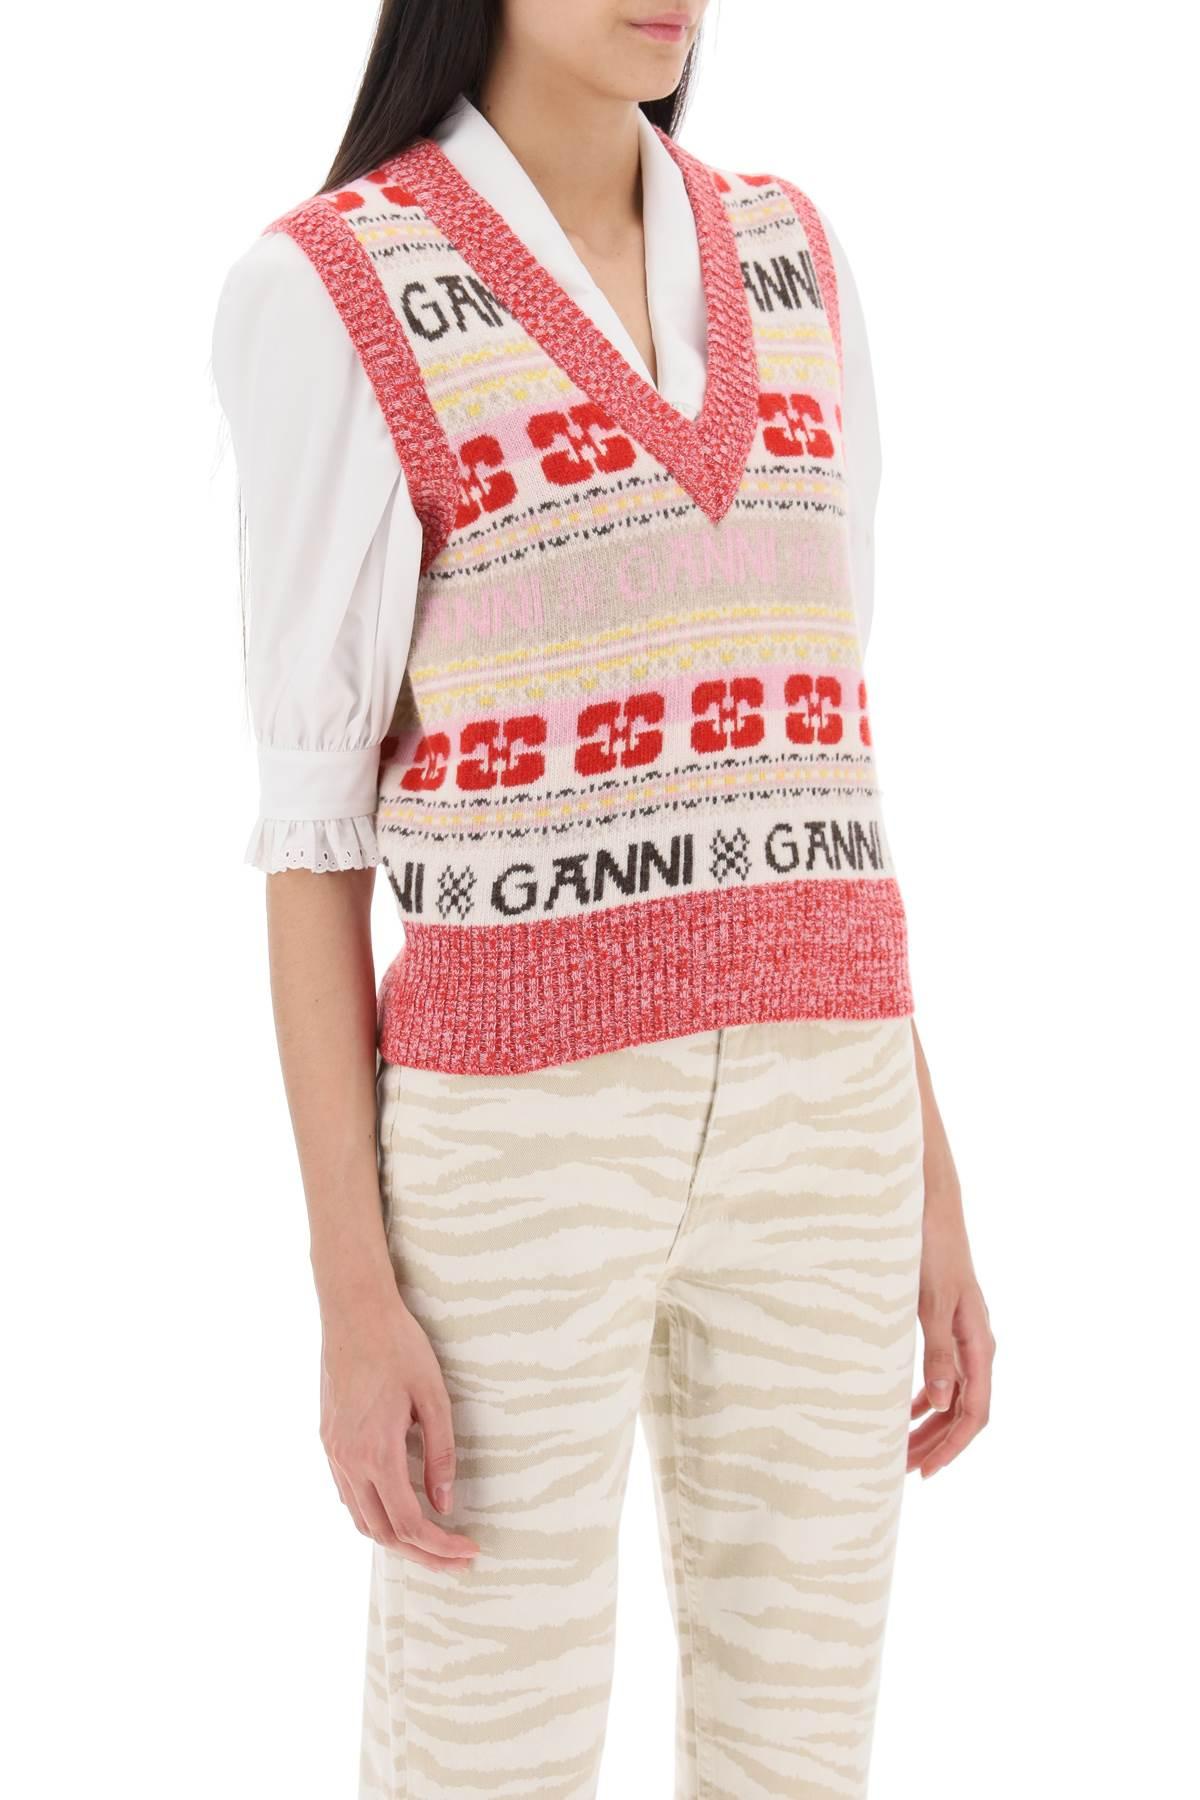 Ganni Vest In Jacquard Knit With Graphic Logo Motif in Red | Lyst